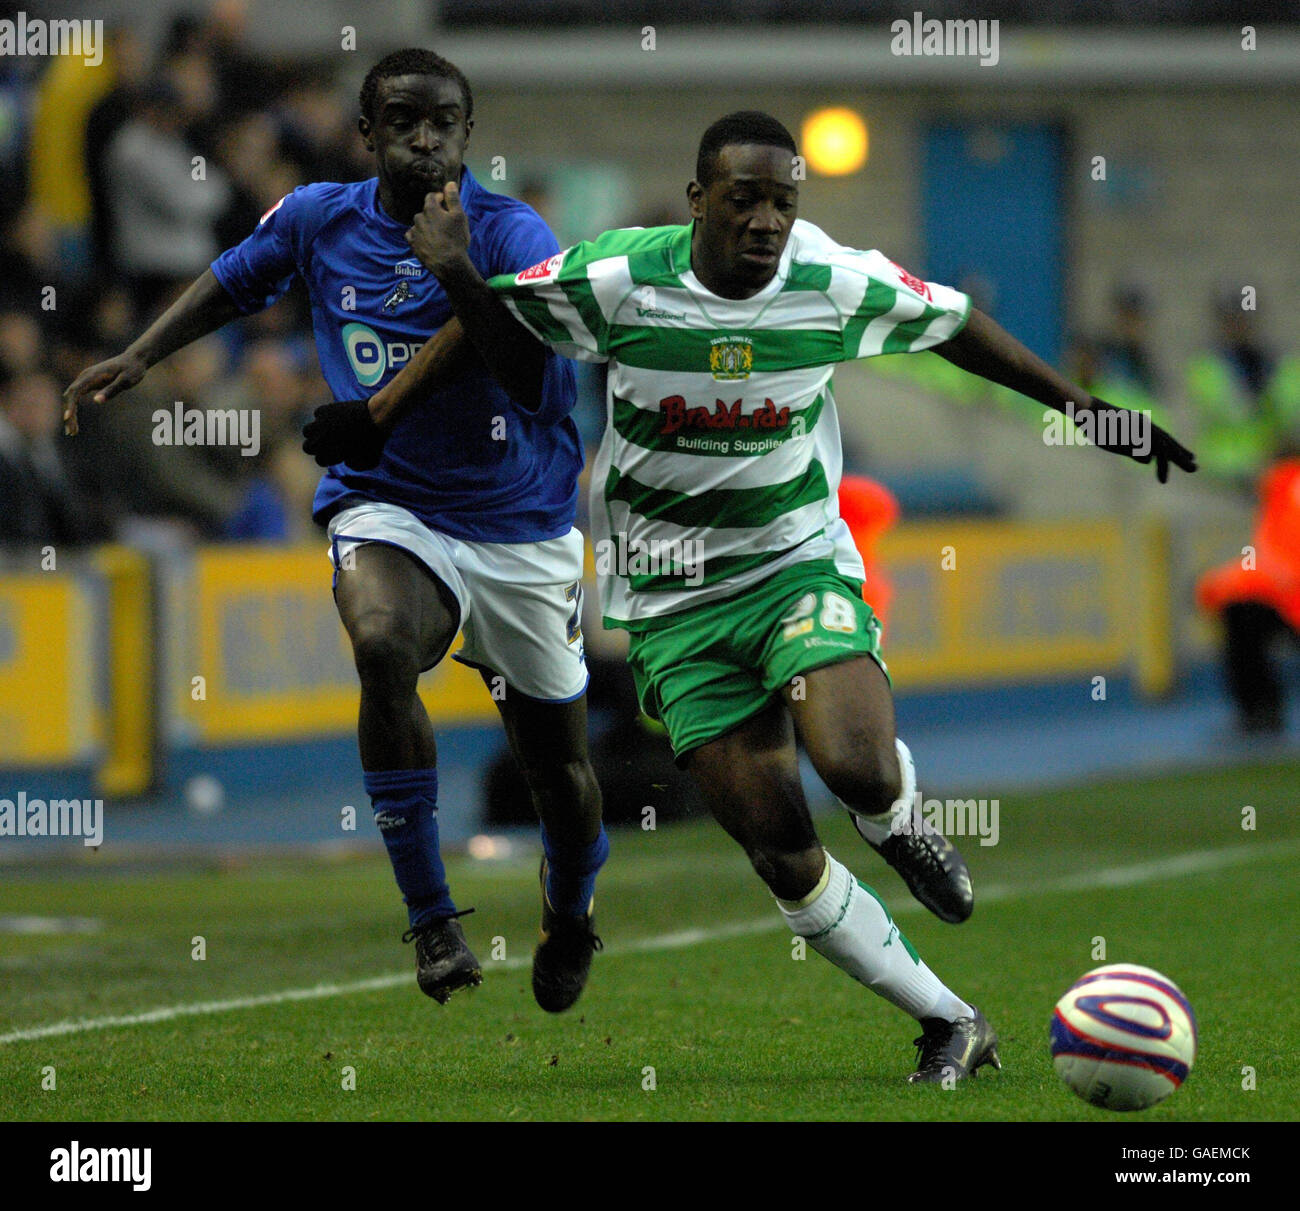 Millwall's Zoumana Bakayogo and Yeovil Town's James Walker during the Coca-Cola Football League One match at The New Den, London. Stock Photo